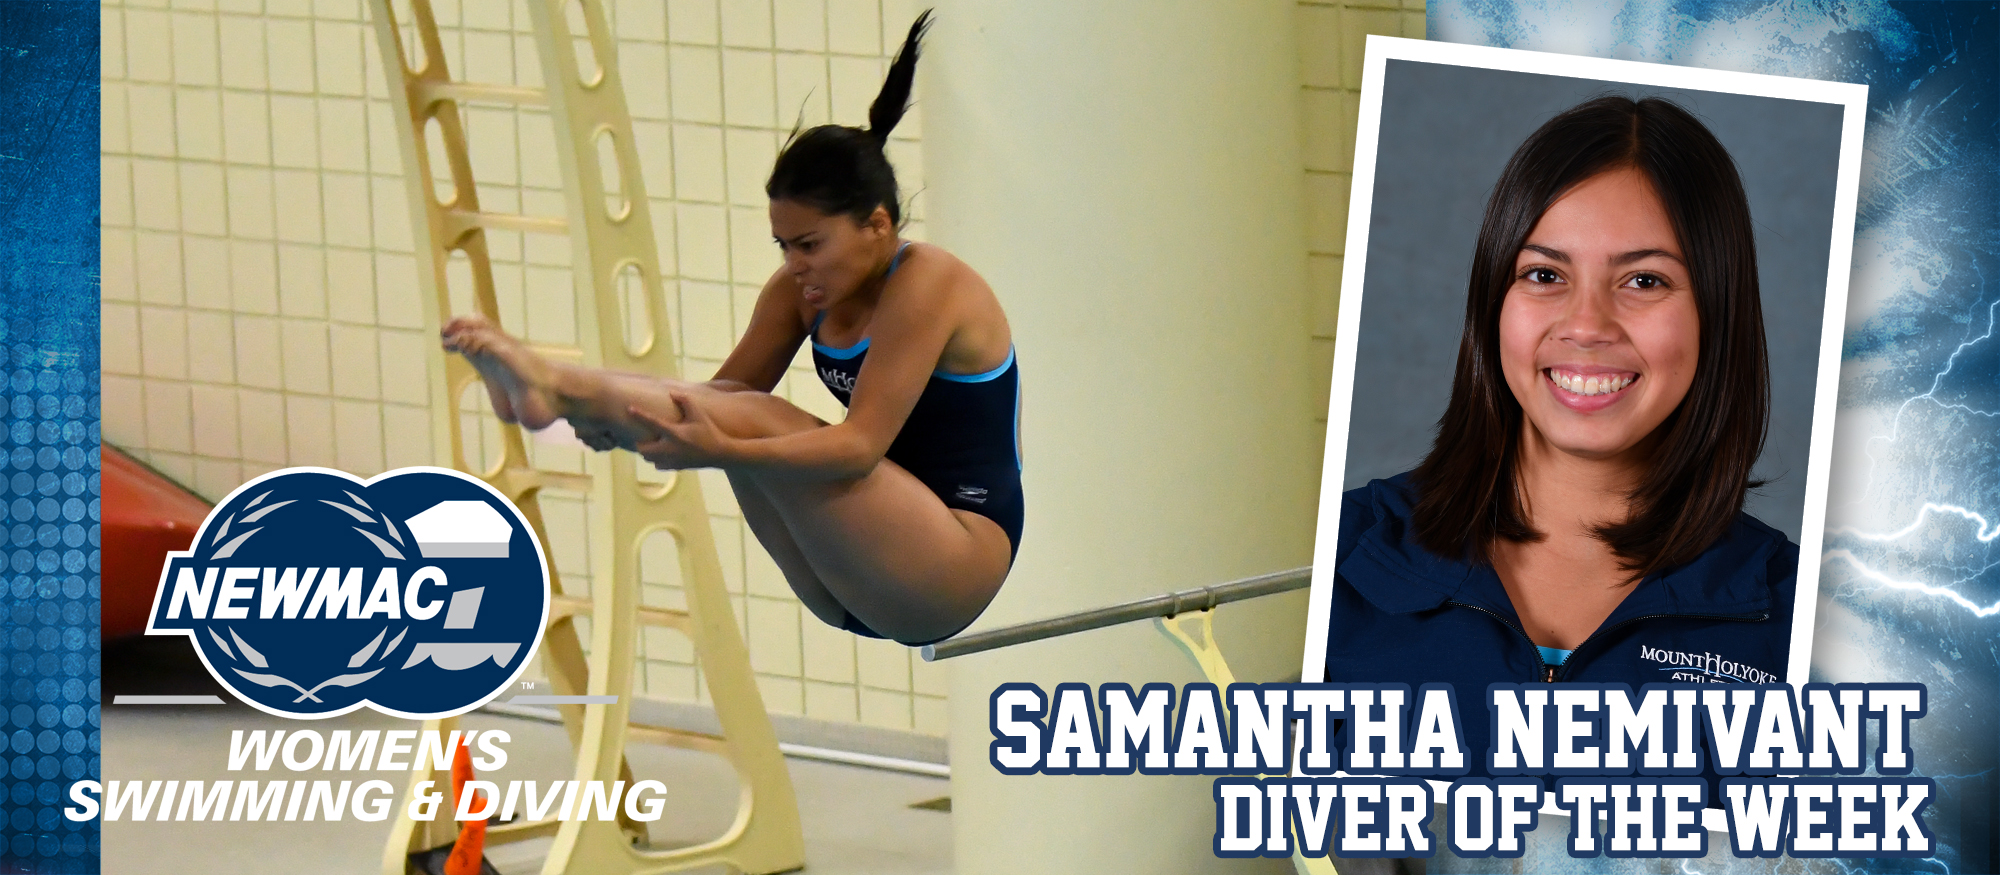 Images of Samantha Nemivant, who was named the NEWMAC Diver of the Week for January 22, 2019